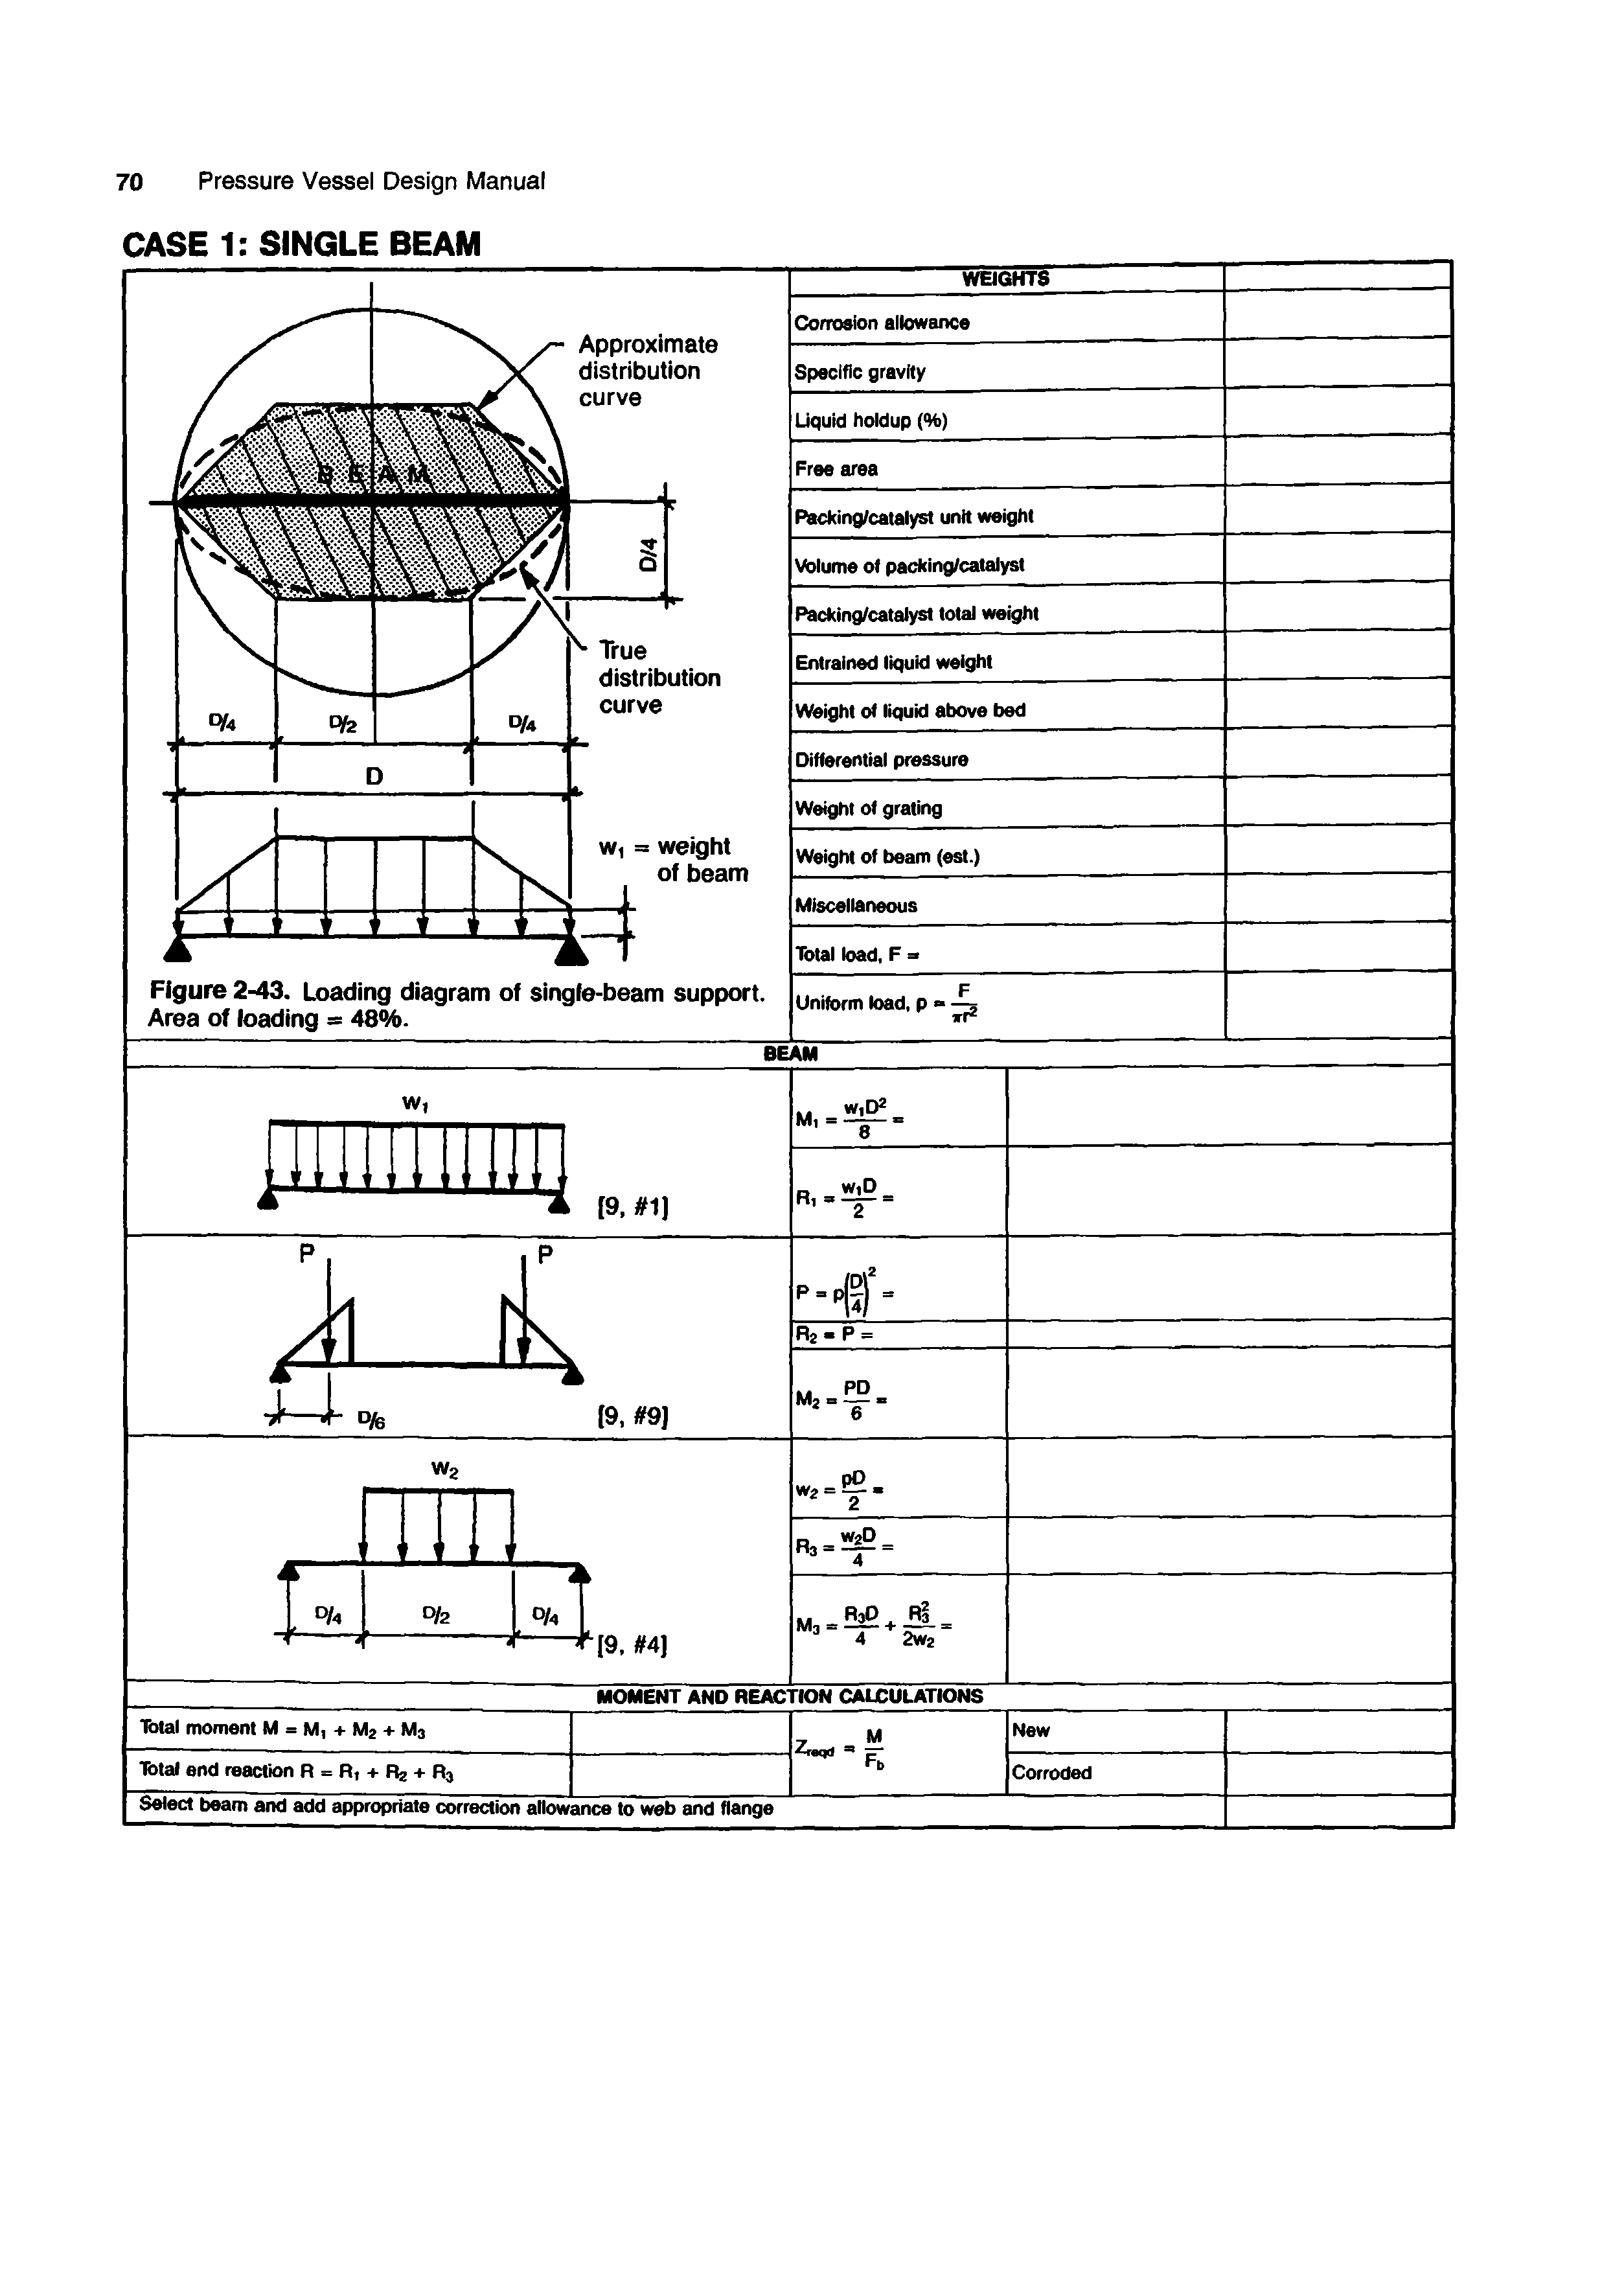 Figure 2-43. Loading diagram of single-beam support. Area of loading s 48%.